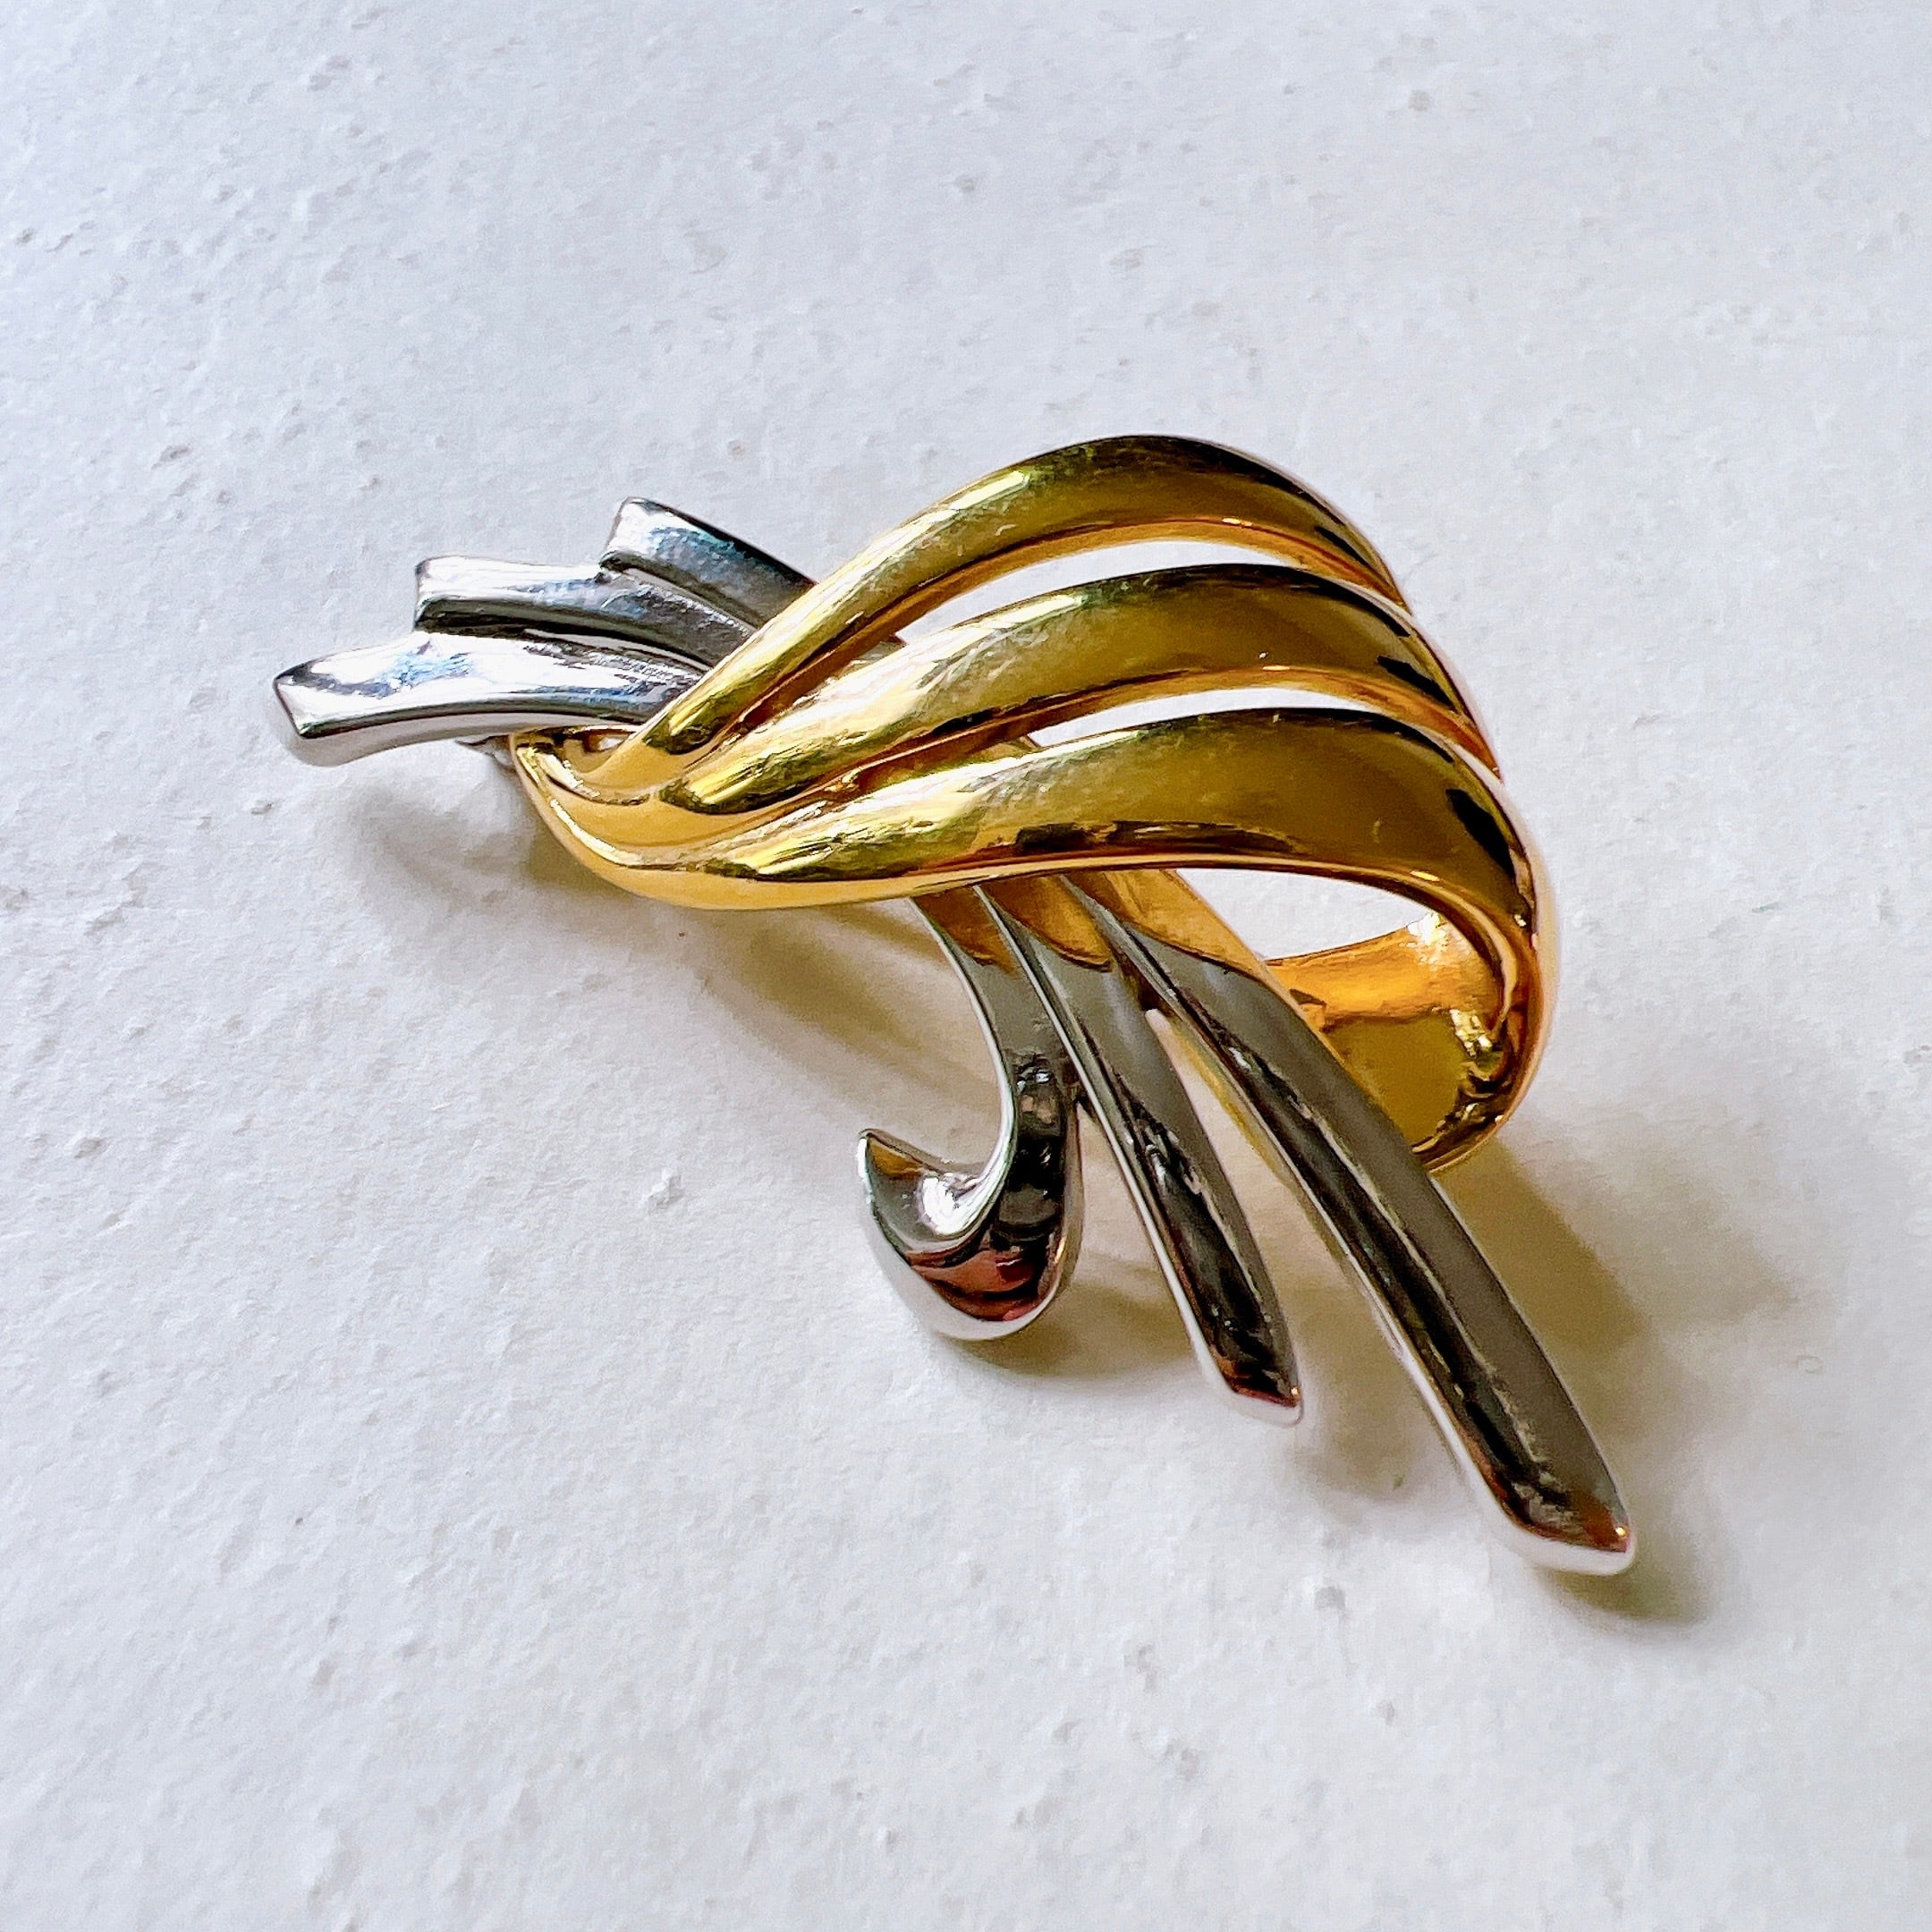 SCM28-【 MONET 】モネ・ヴィンテージブローチ 1970〜80s Silver tone and gold tone brooch with  curved line design